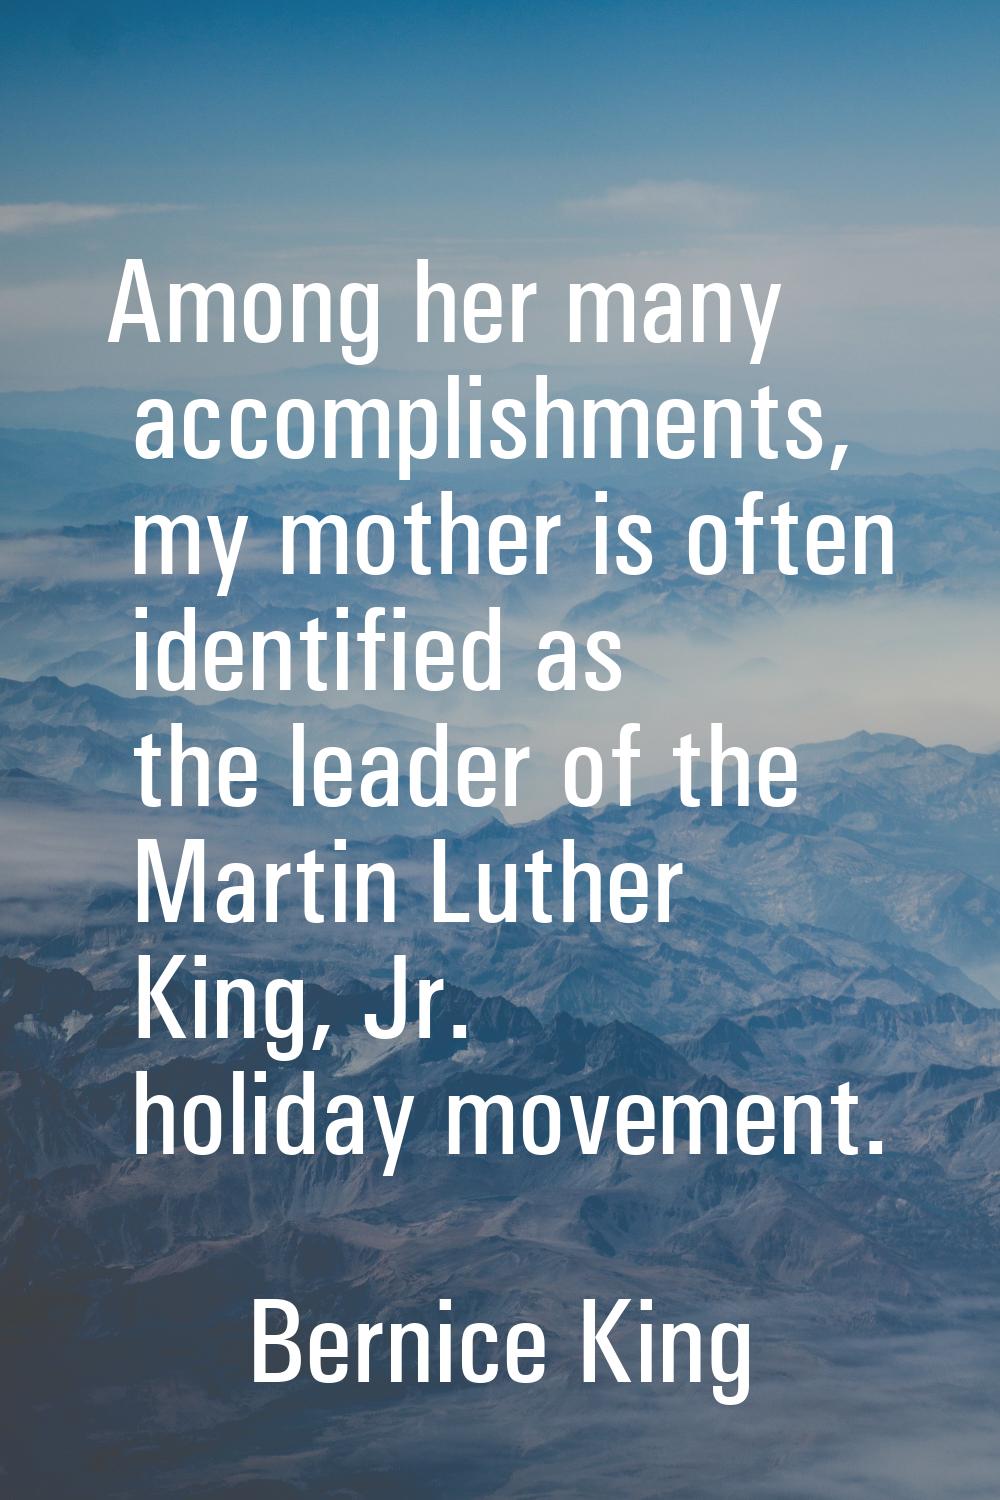 Among her many accomplishments, my mother is often identified as the leader of the Martin Luther Ki